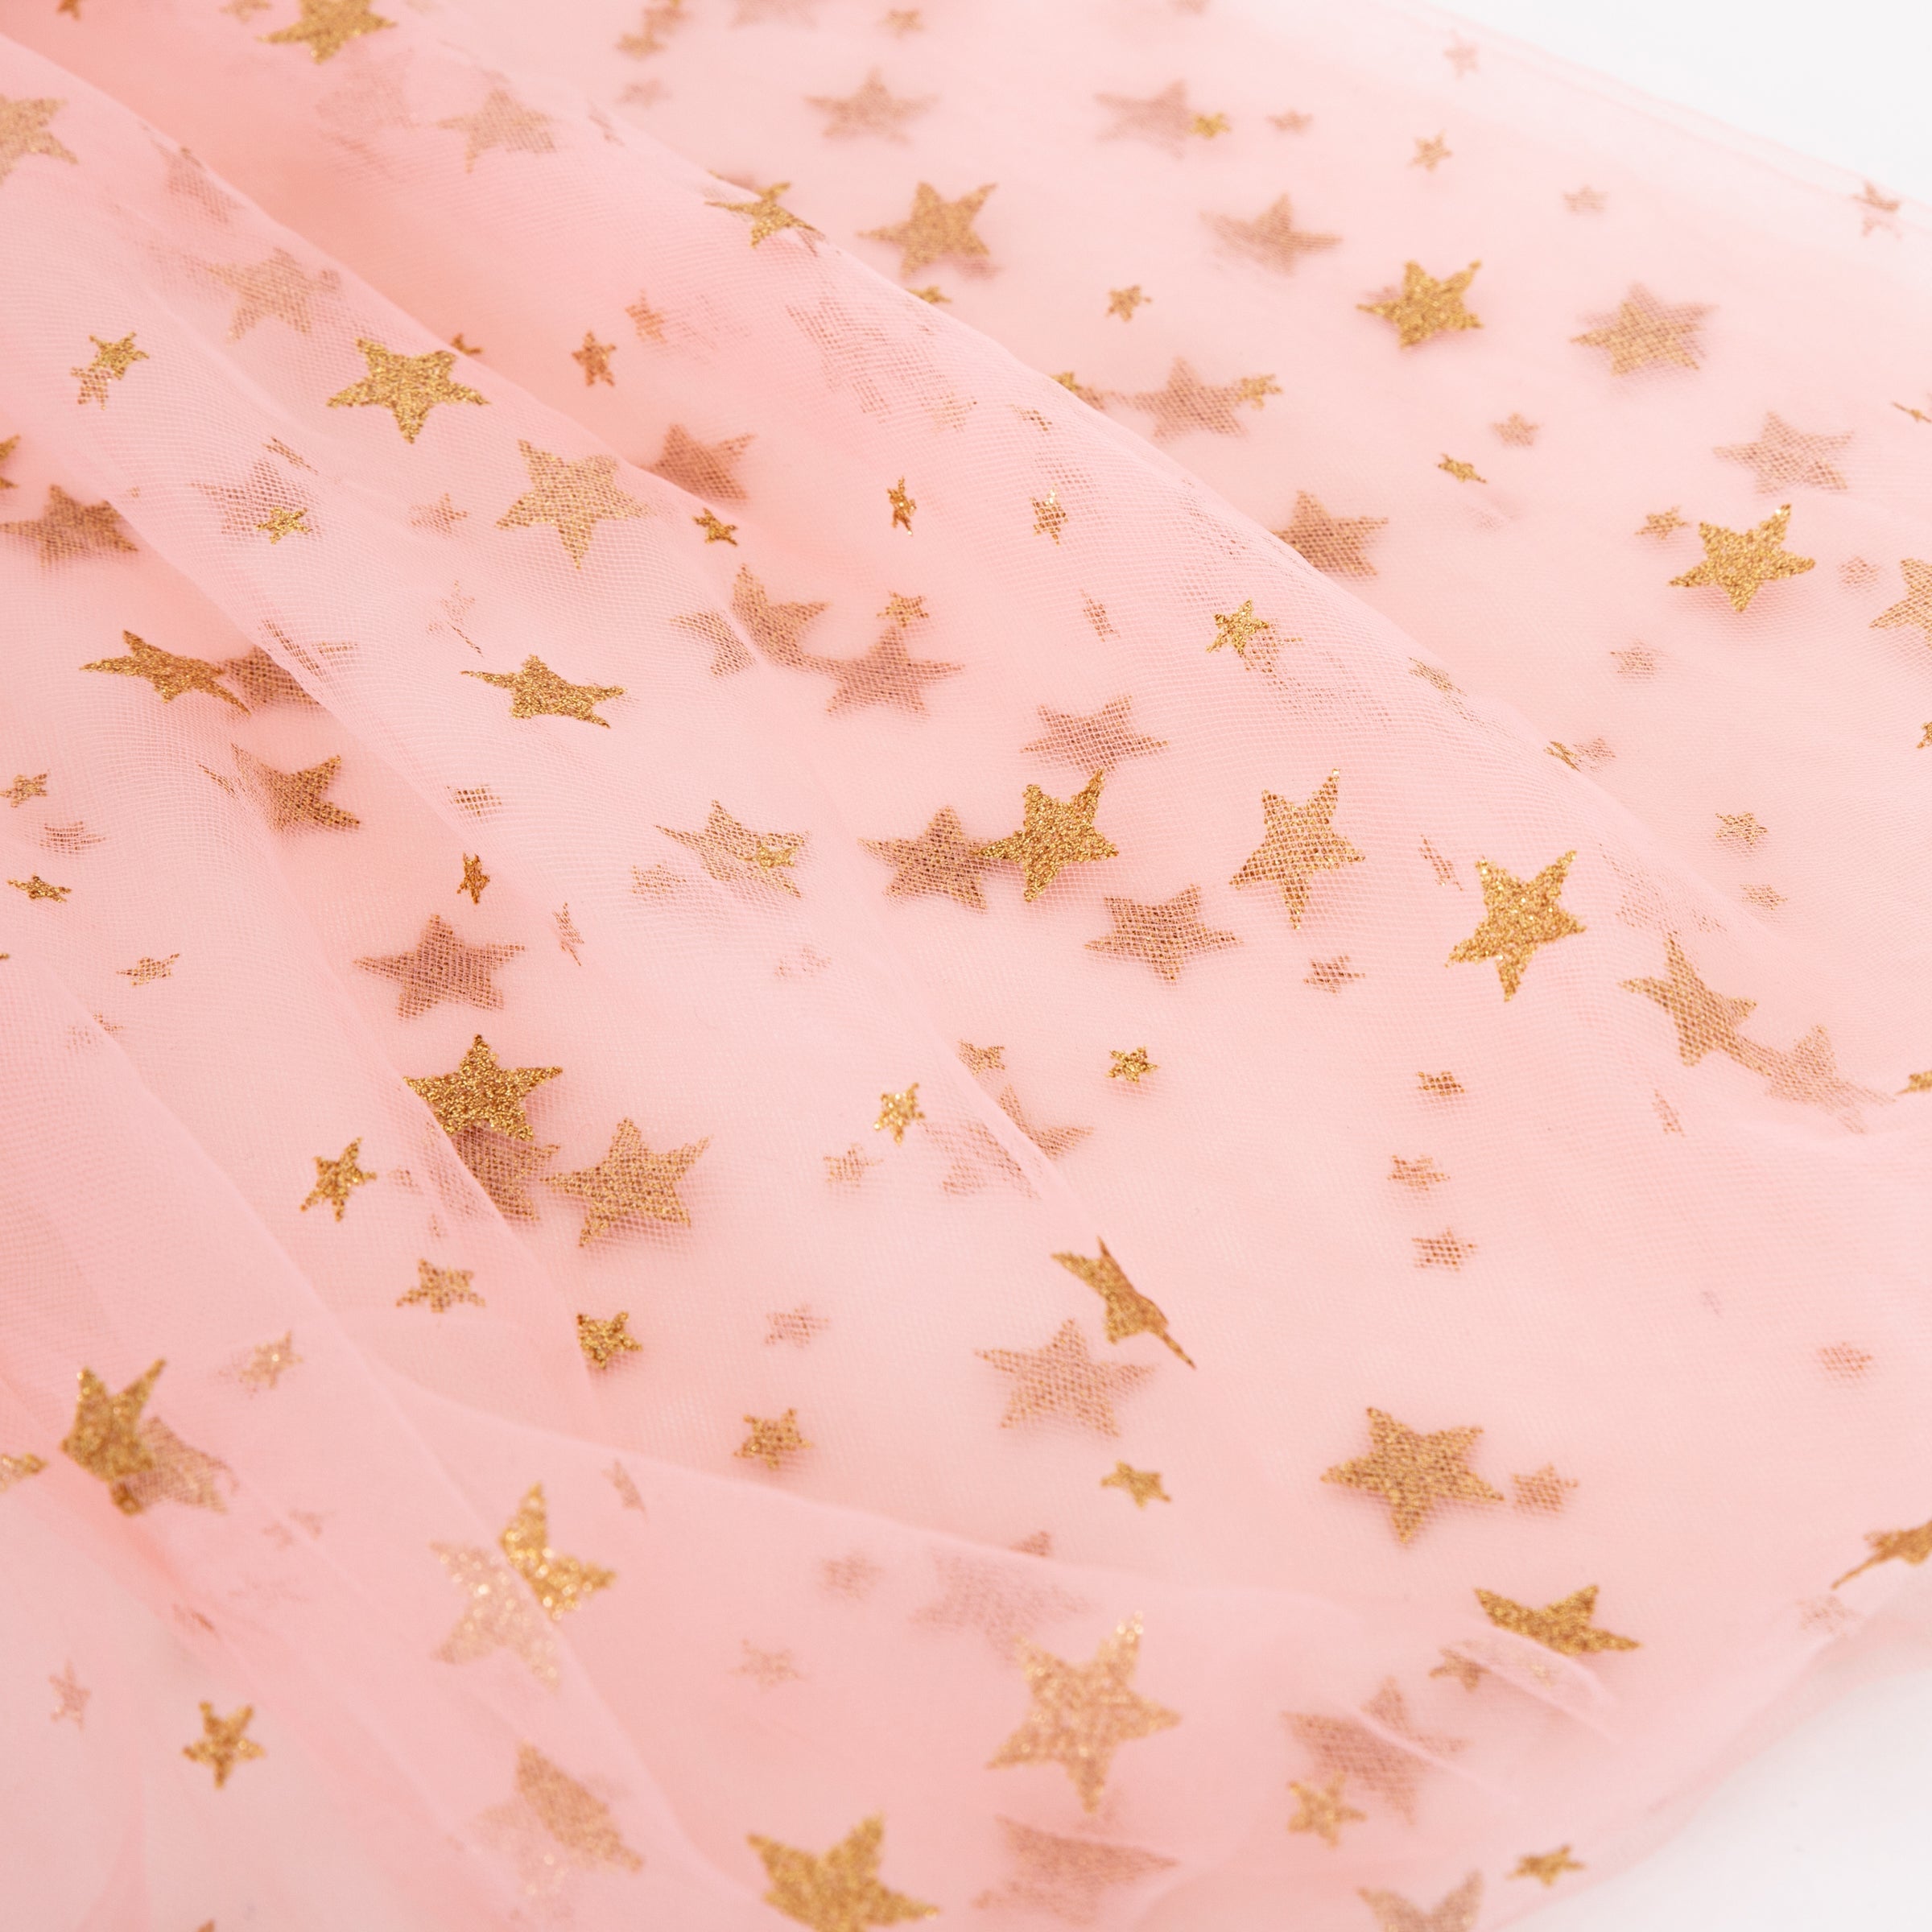 Pink Star Tulle Cape